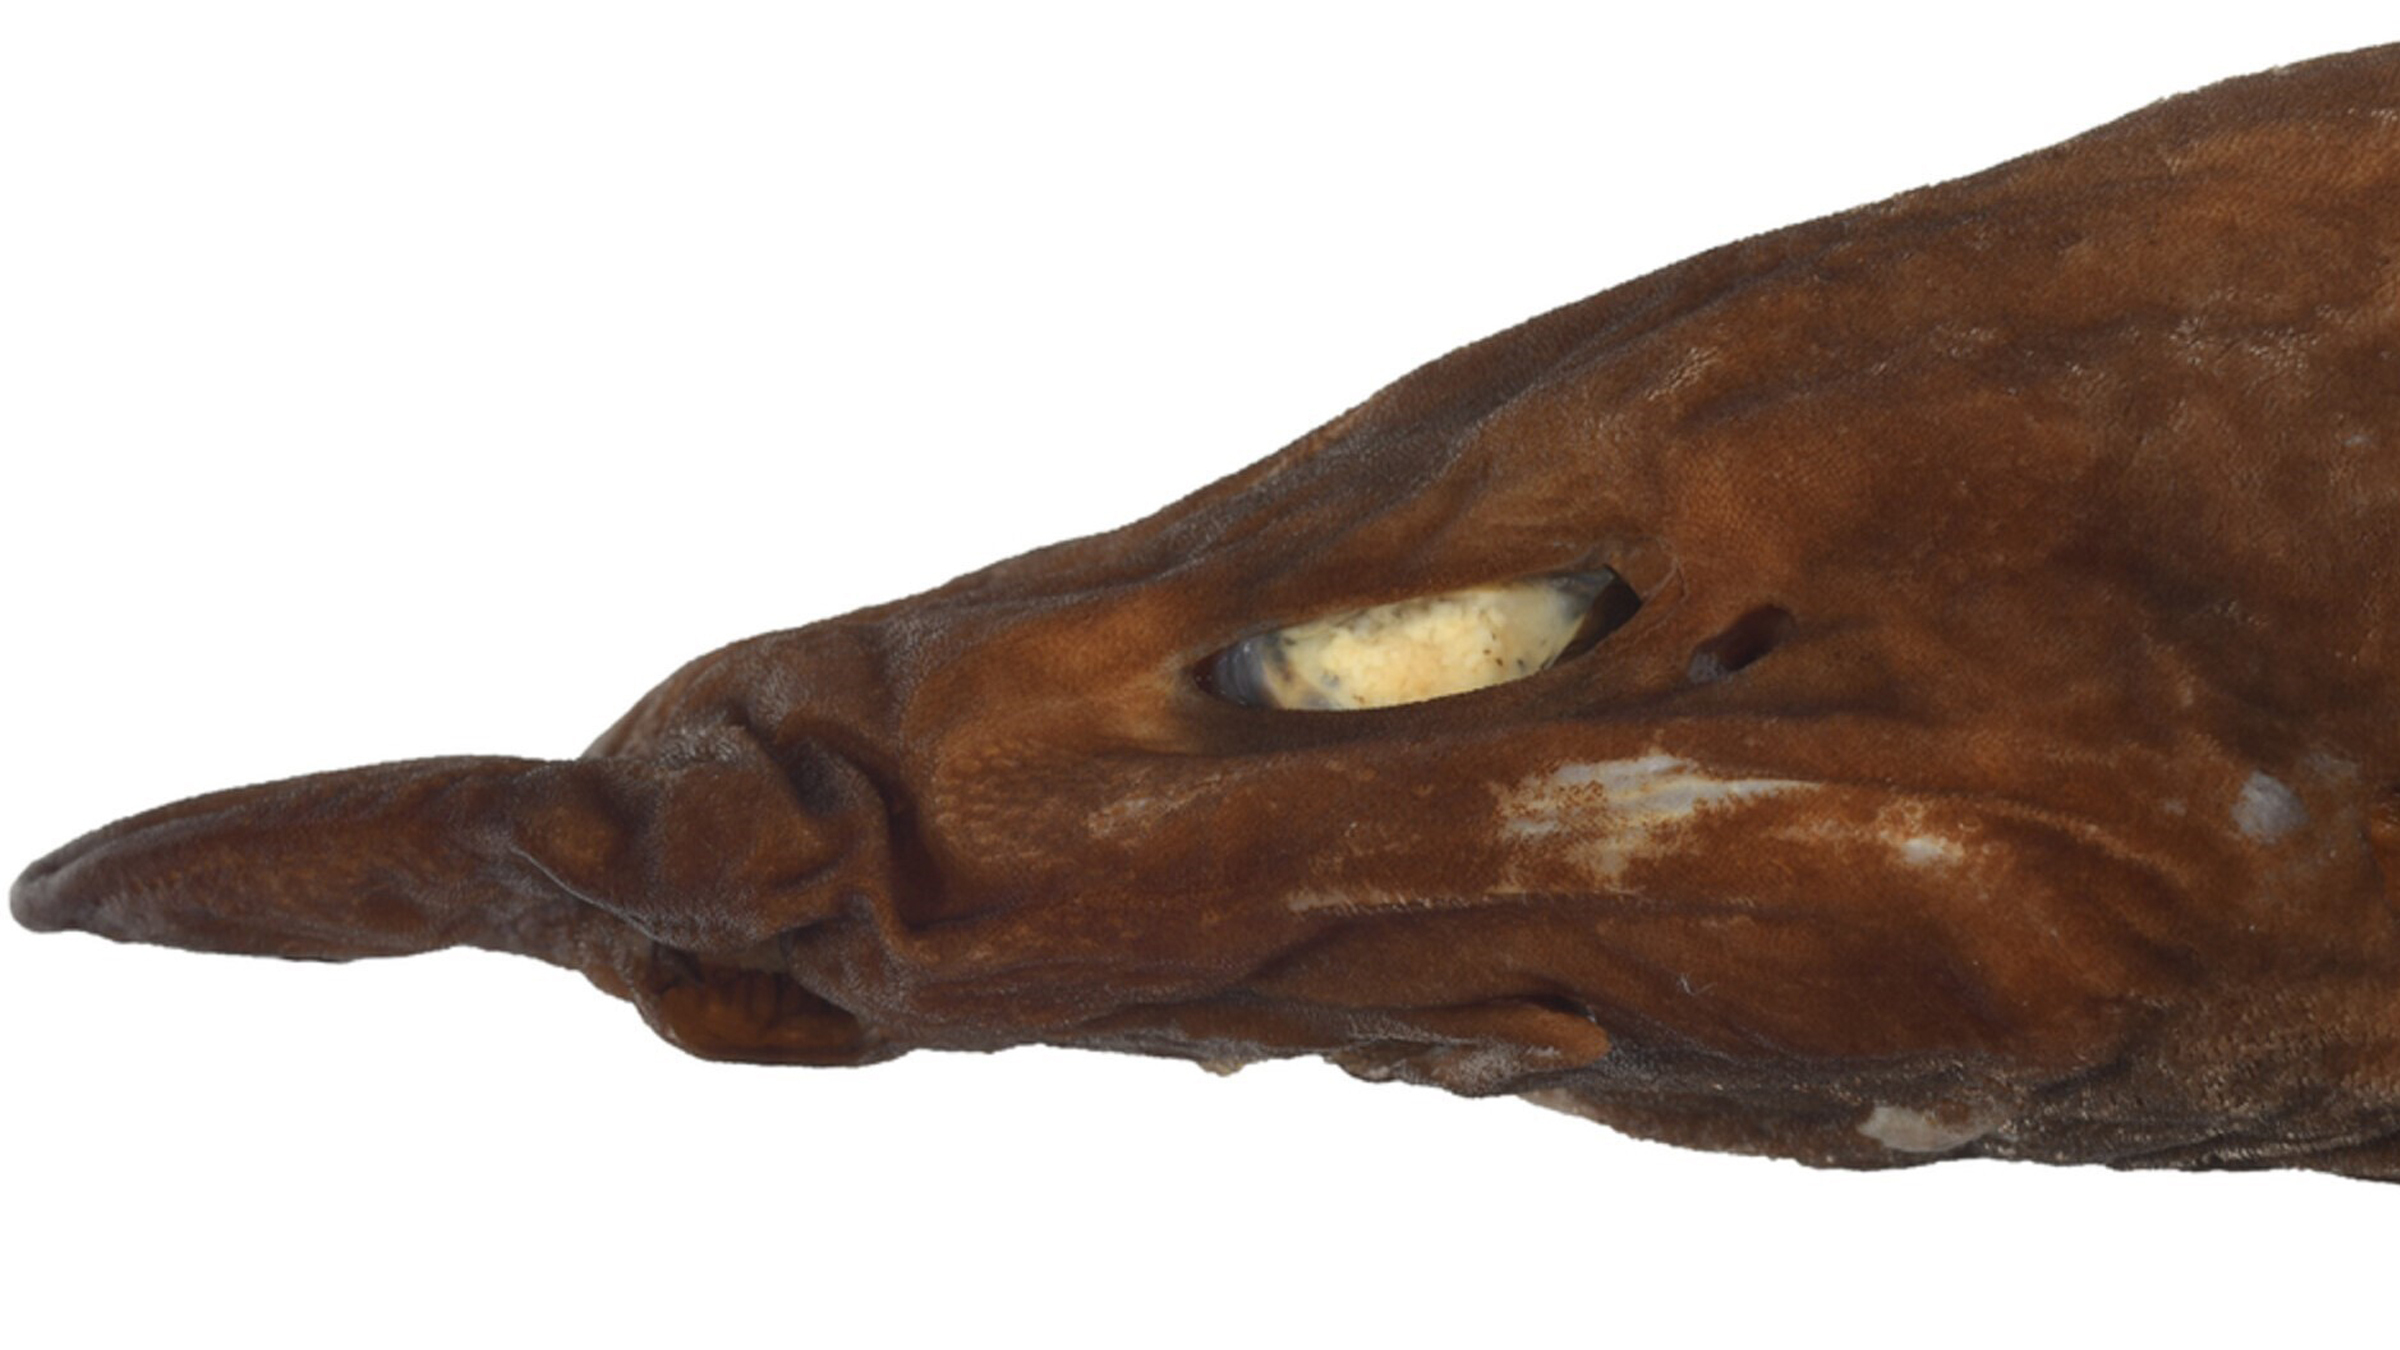 The discovery of a newly identified Demon Shark